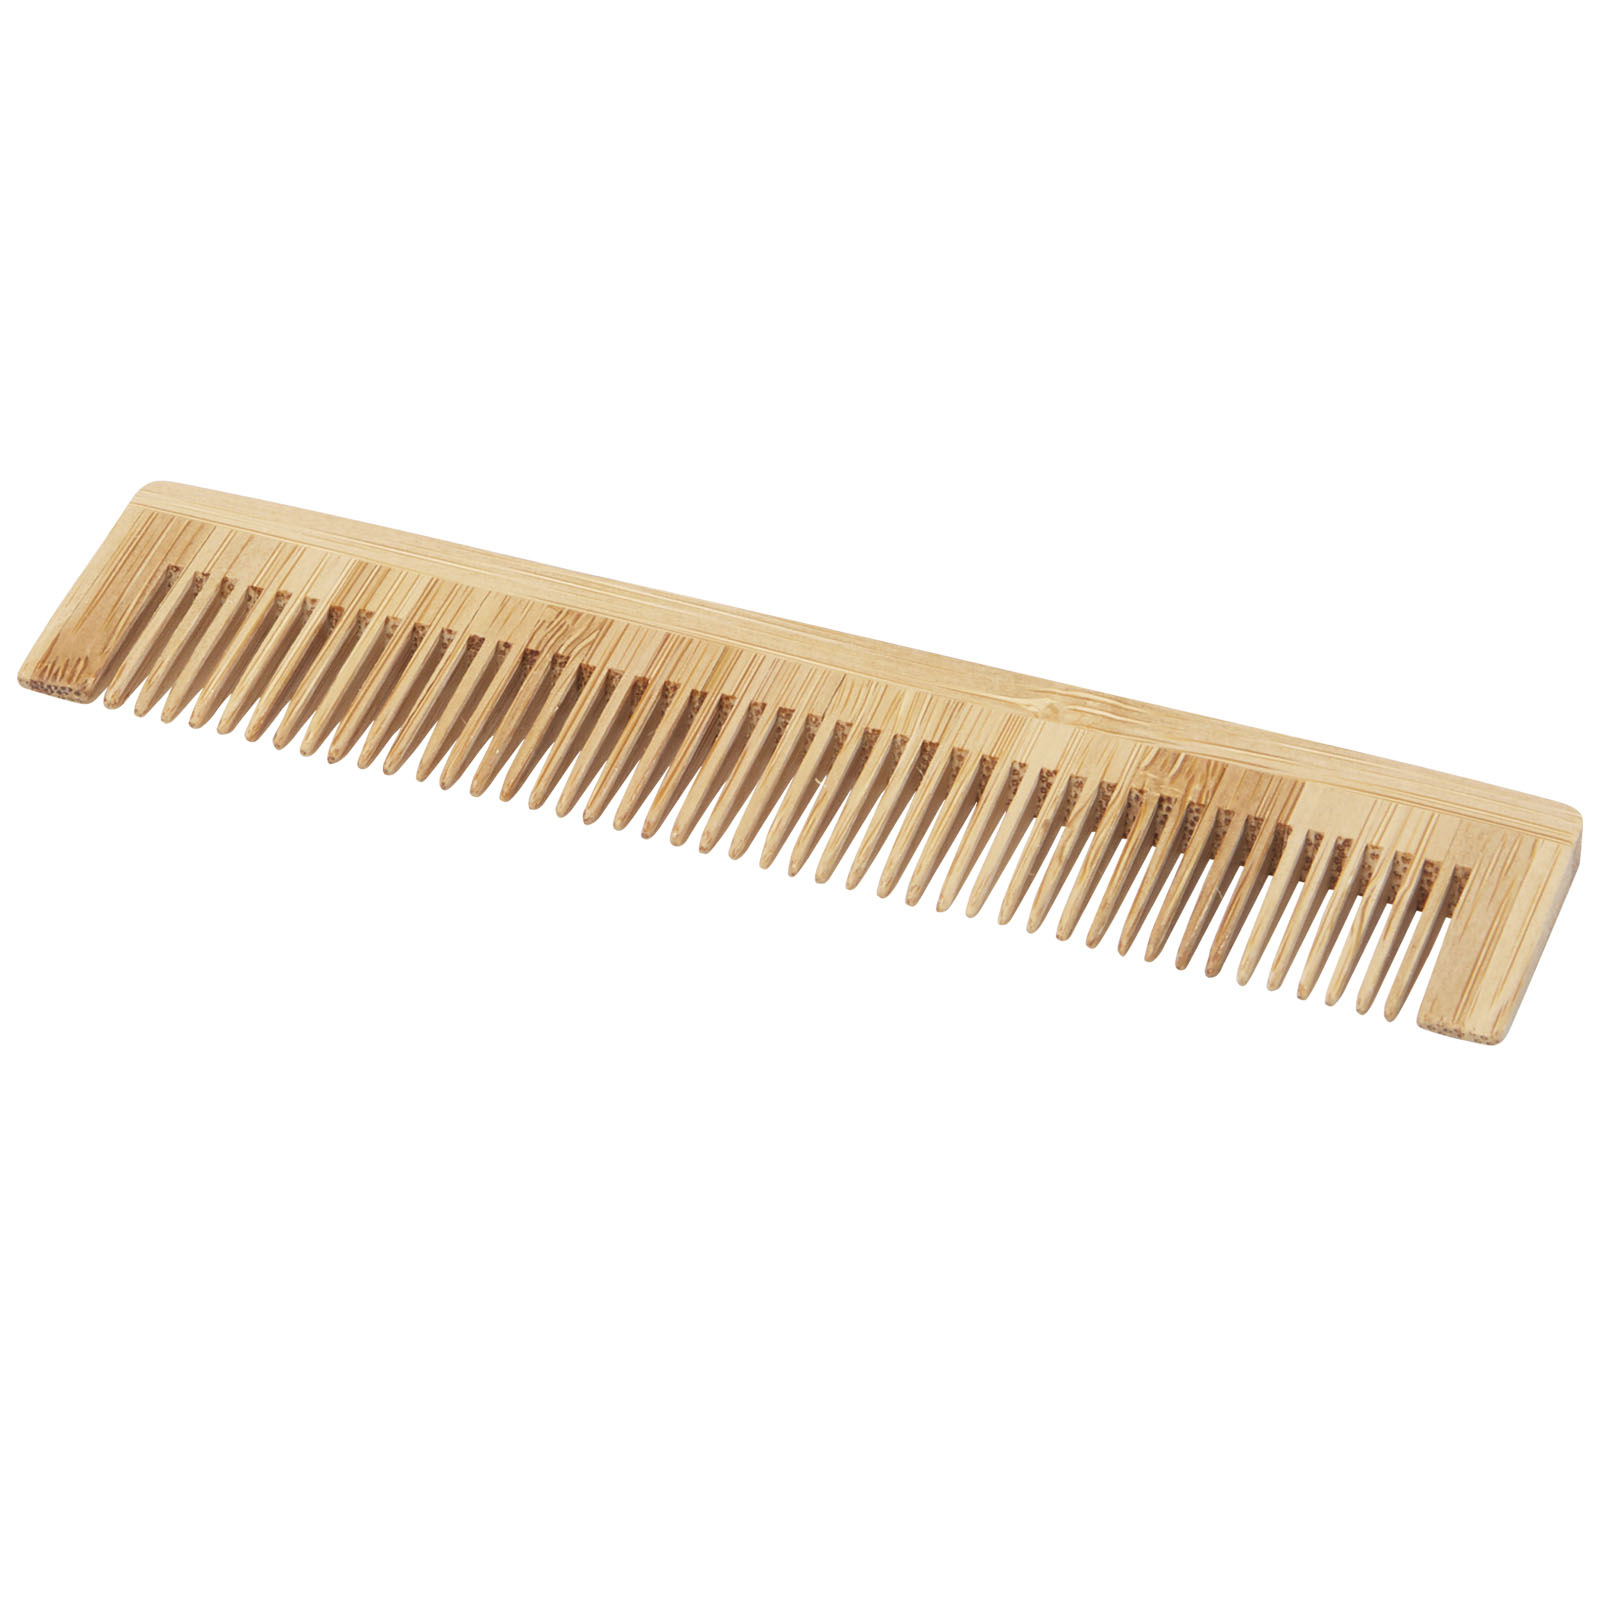 Advertising Personal Care - Hesty bamboo comb - 0